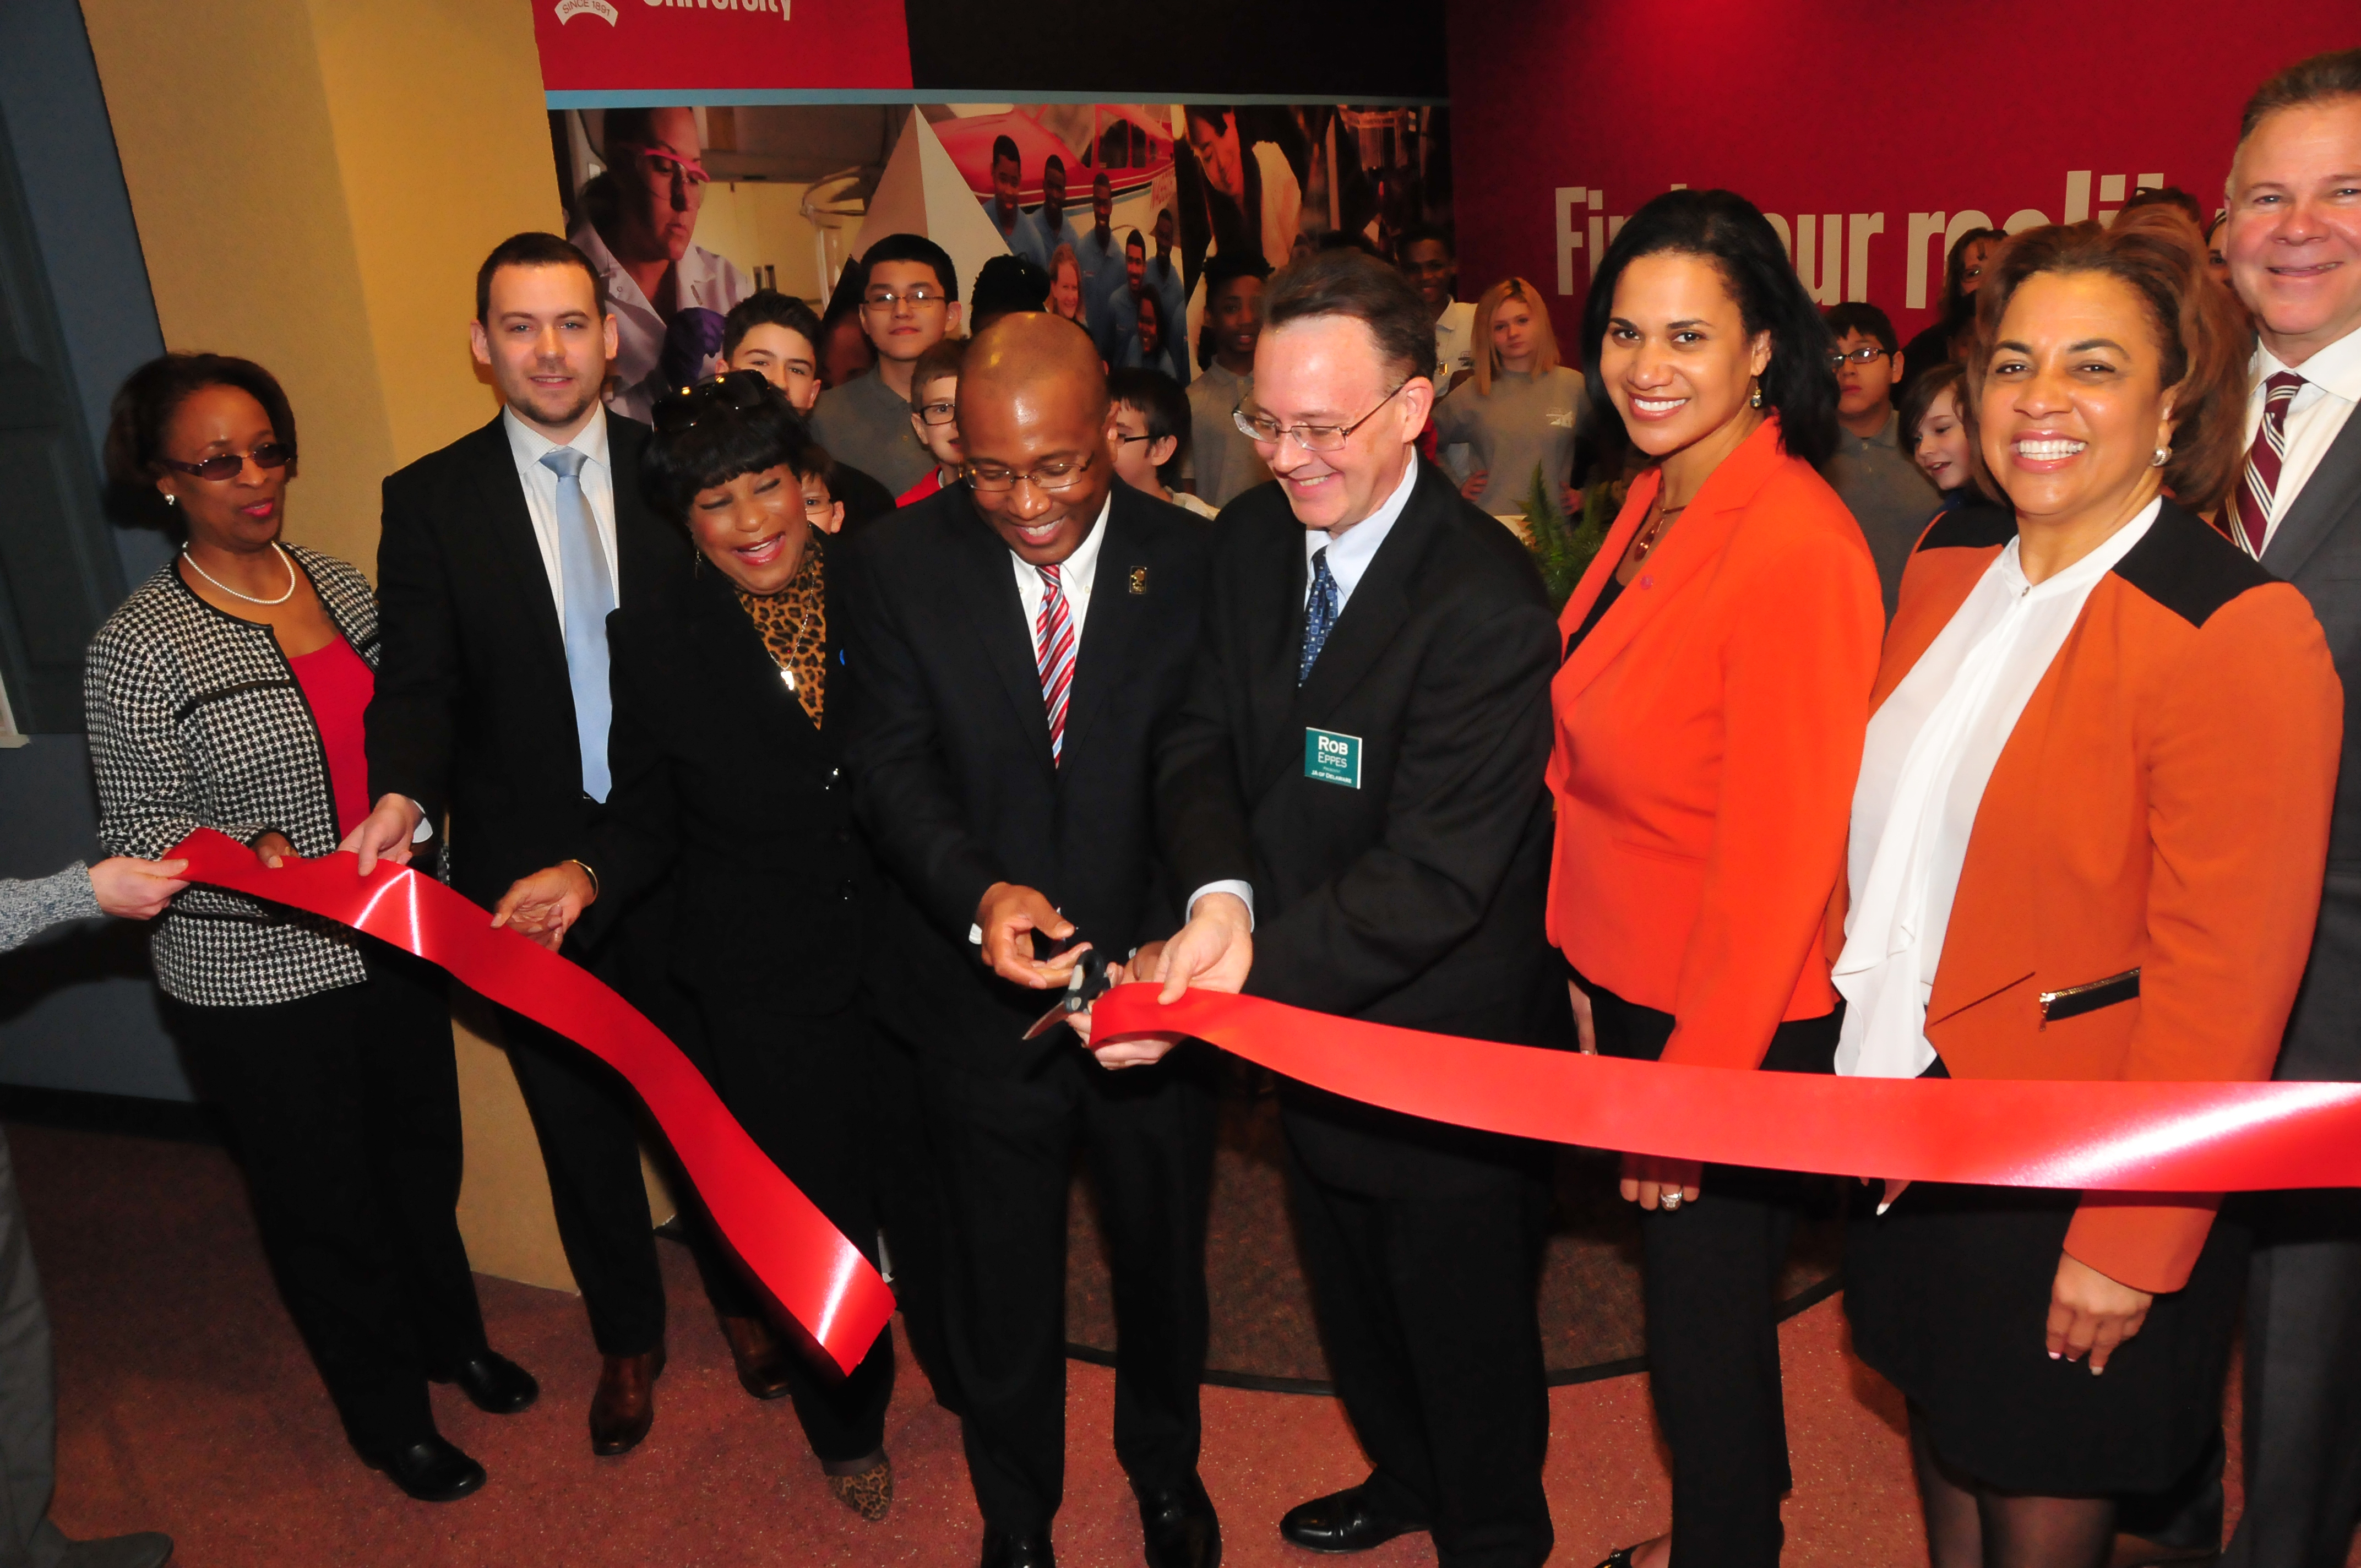 Participating in the ribbon cutting of the new Delaware State University section of the Junior Achievement Financial Bank in Wilmington are: (l-r) Dr. Marshá Horton, dean of the DSU College of Education, Health and Public Policy; Bryan P. Gordon, deputy chief of staff for Lt. Gov.; state Rep. Stephanie T. Bolden; DSU President Harry L. Williams; Robert Eppes, president of Junior Achievement of Delaware; Dr. Kara Odom Walker, Secretary of Delaware Health and Social Services; Valerie Dinkins, special asst. to the DSU president; and Michael Carney, JA development director